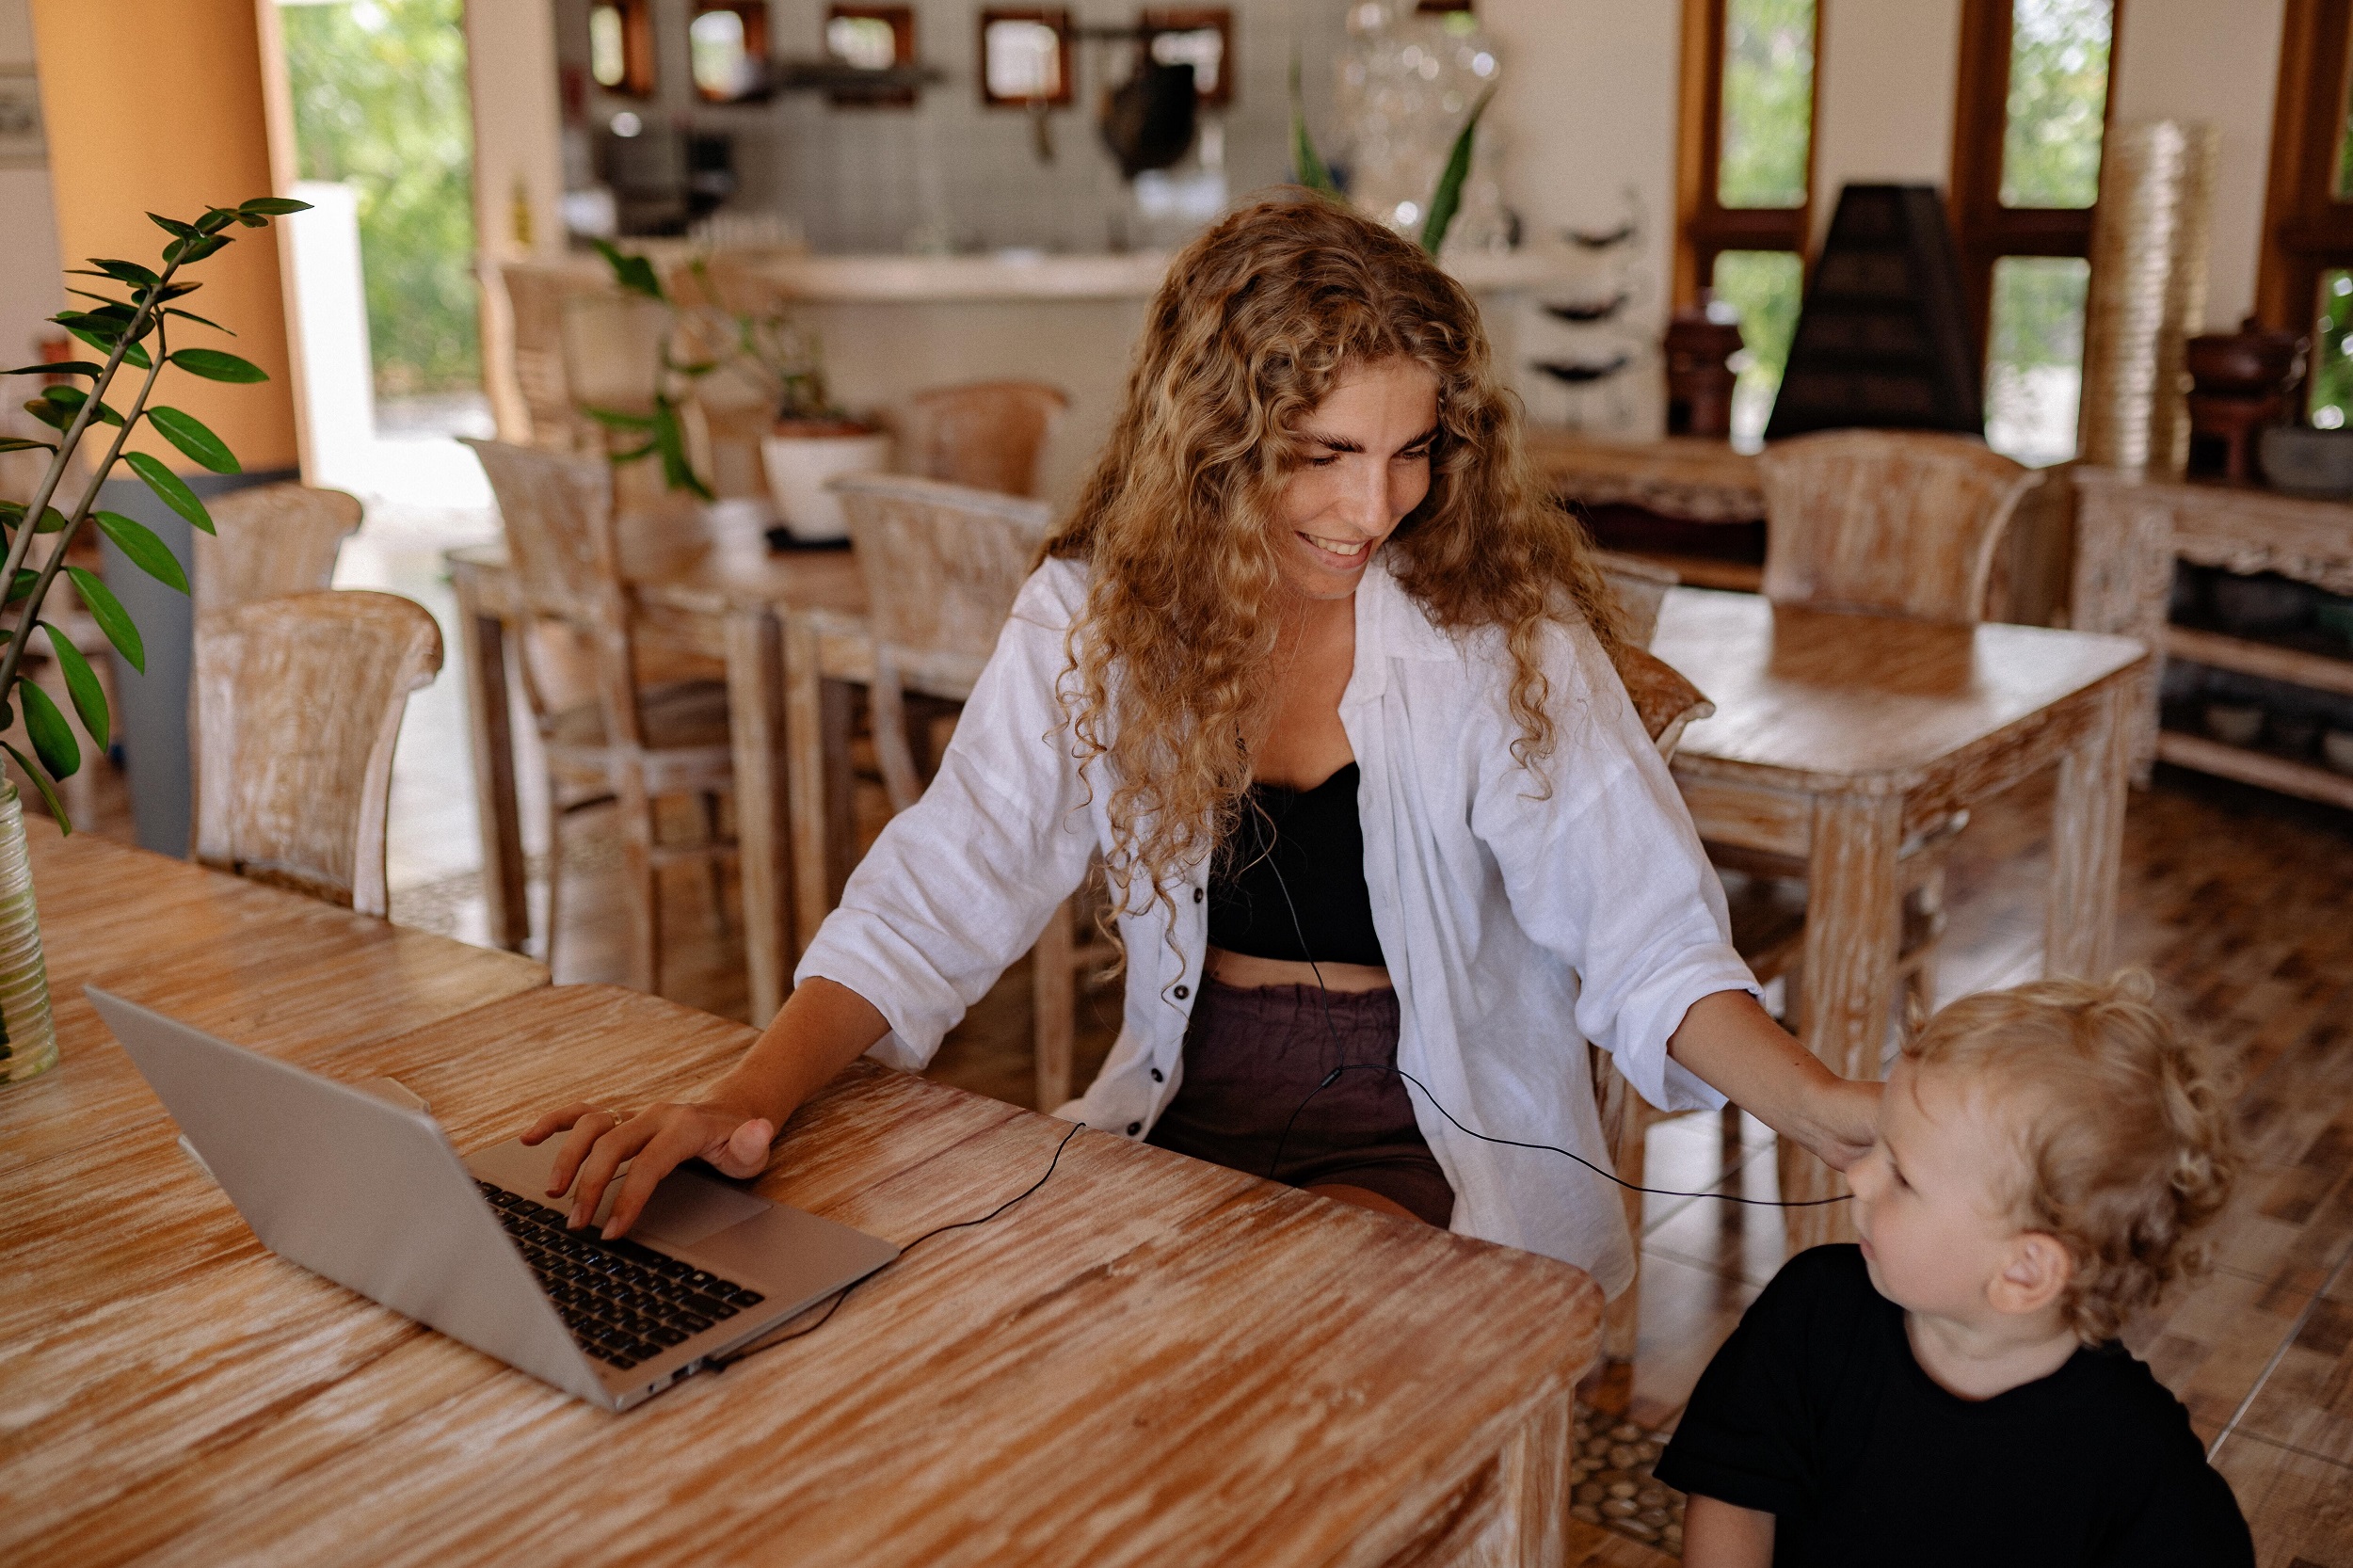 Working as a freelancer enables mothers to start their own enterprises using their skills and expertise